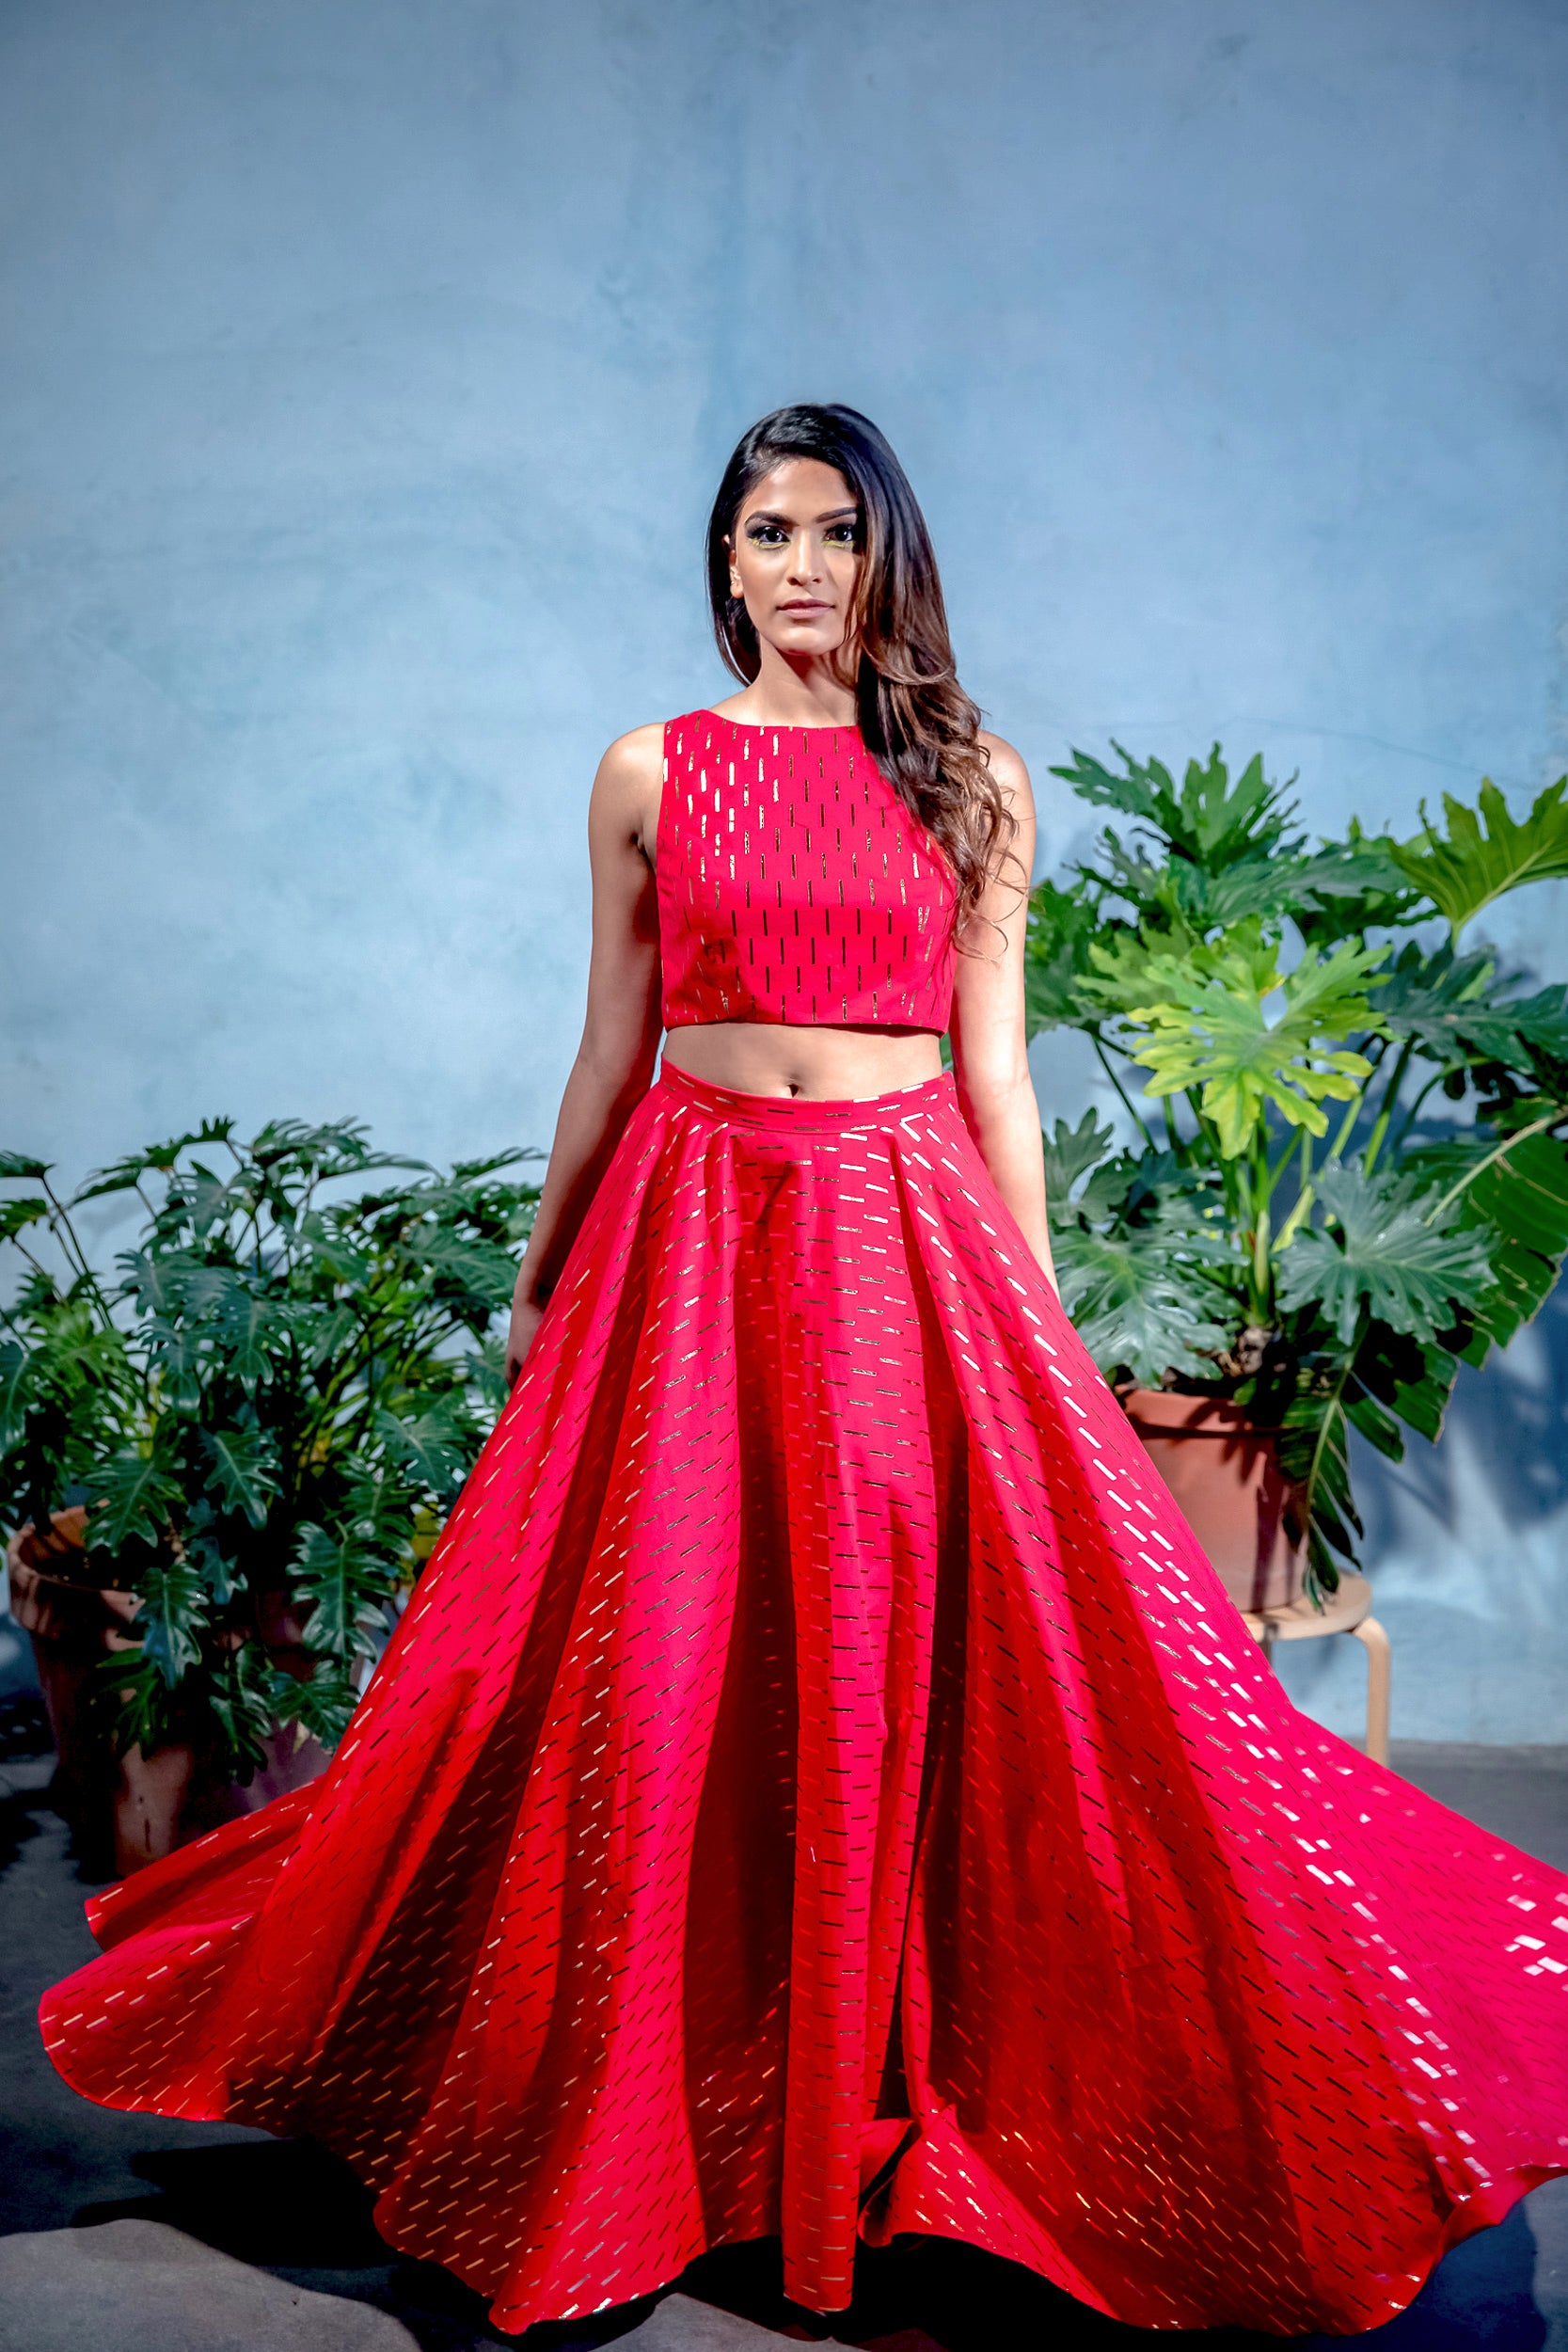 ANISHA Red Cotton Skirt with Gold Foil Rectangle Print - Front View - Harleen Kaur